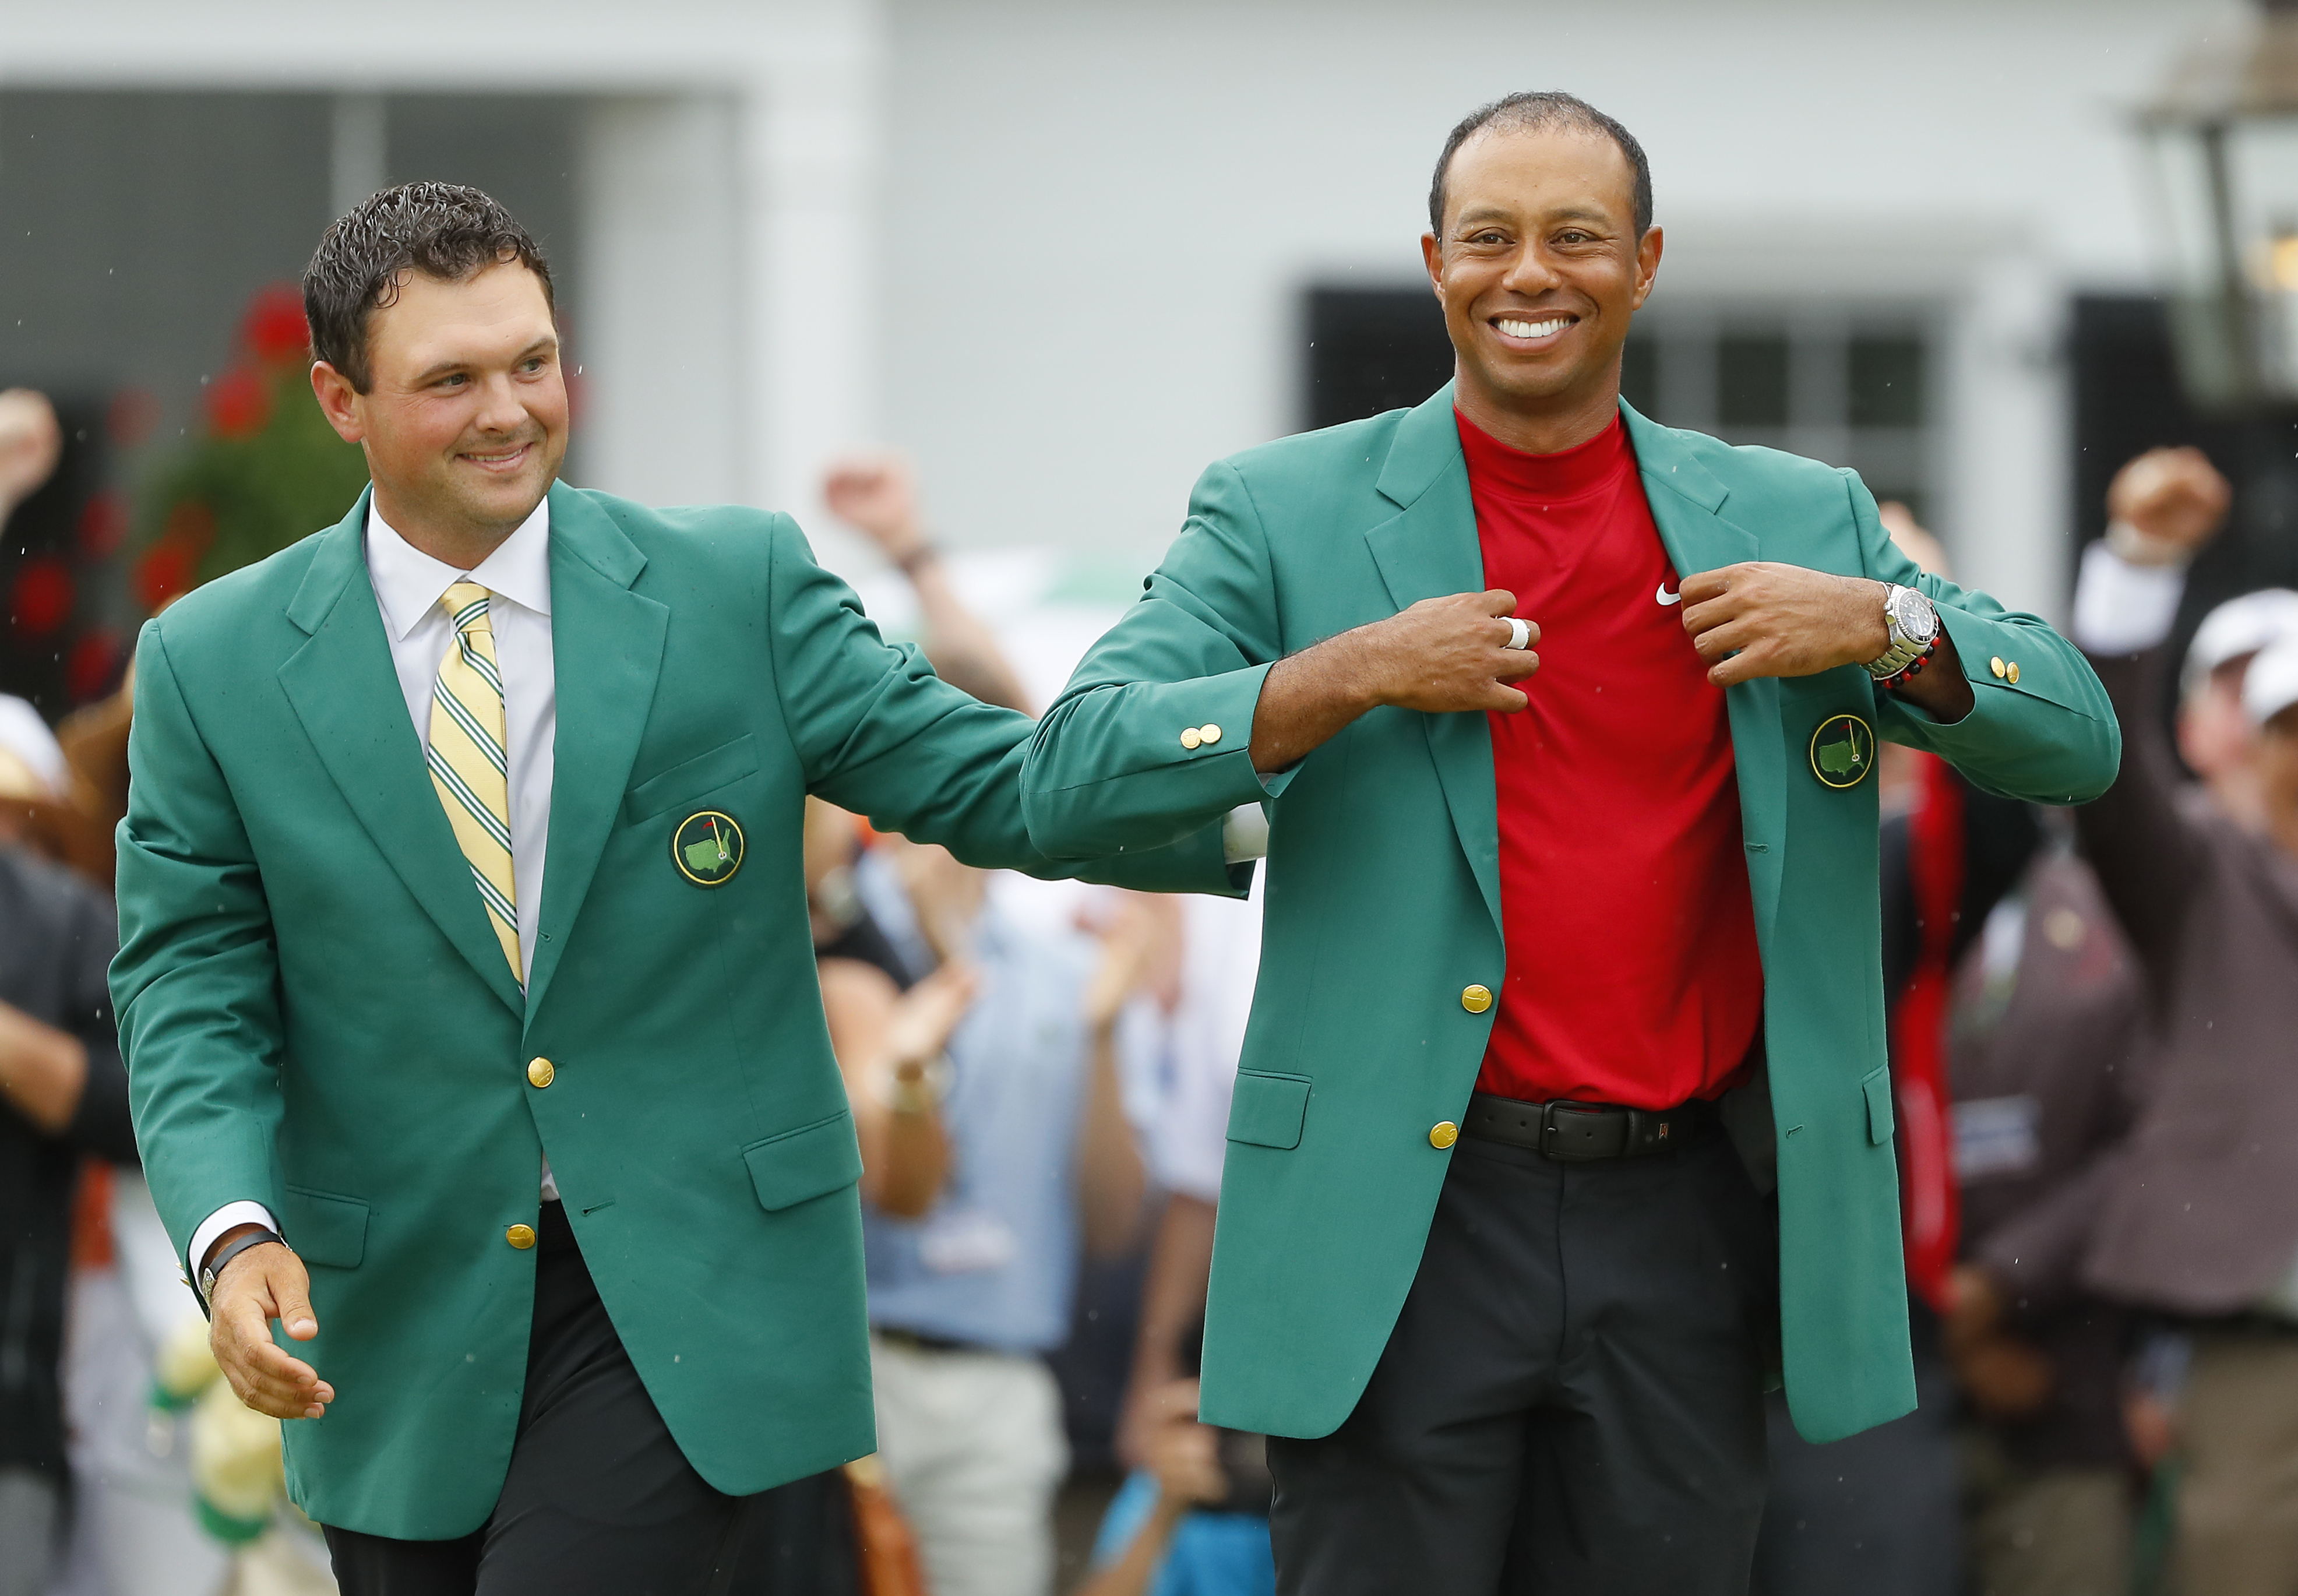 Why is the Masters green jacket green?